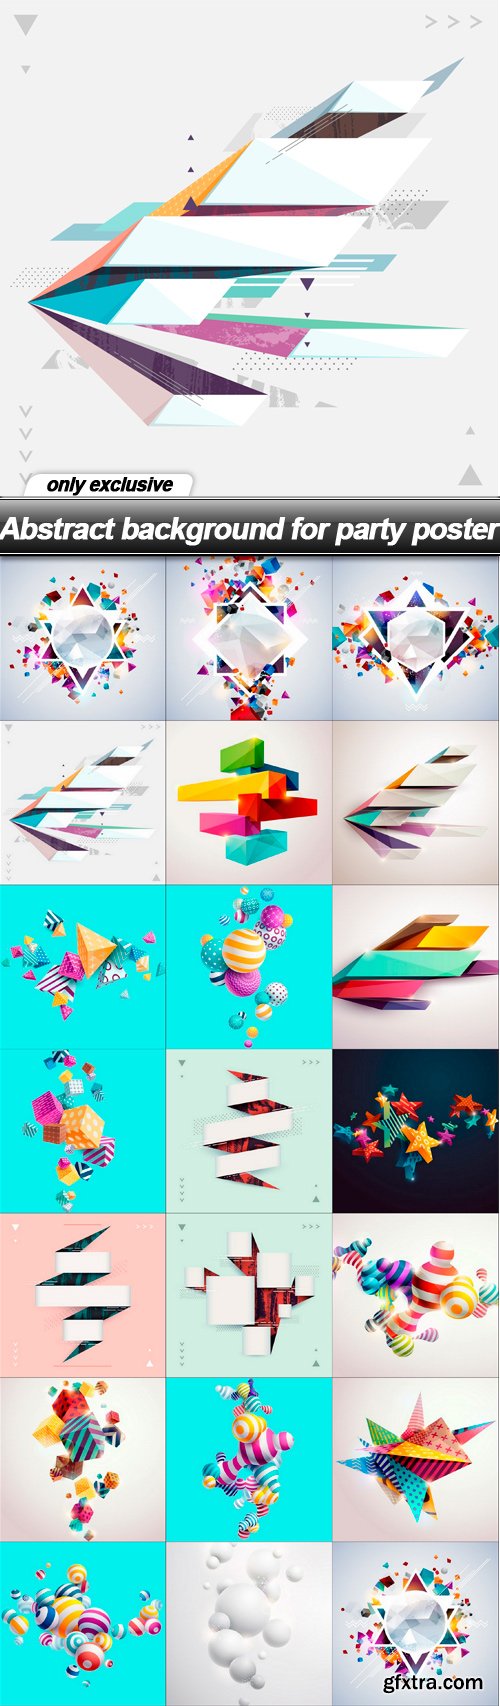 Abstract background for party poster - 20 EPS